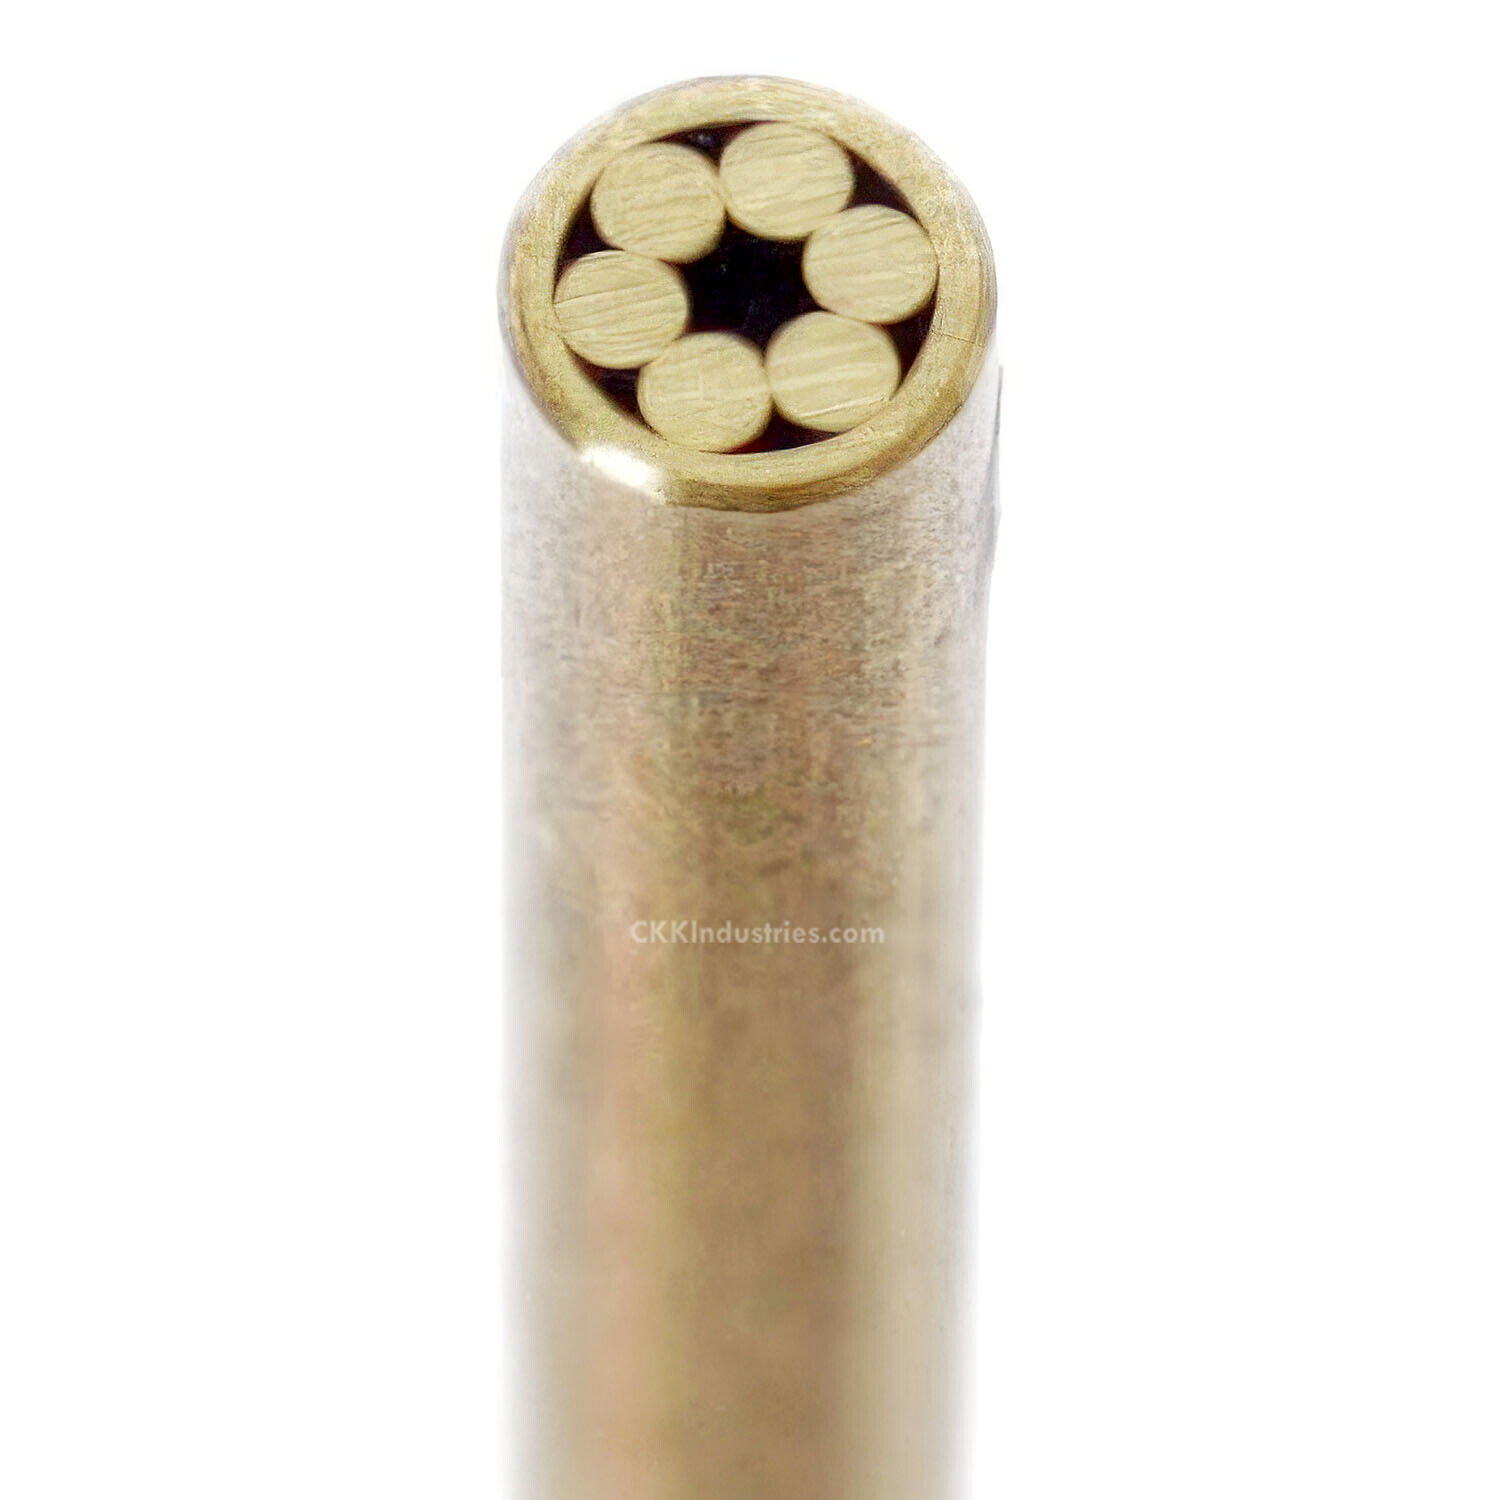 Mosaic Pins - (0.125 (1/8) Inch Diameter) - (20 Different Rod Options)